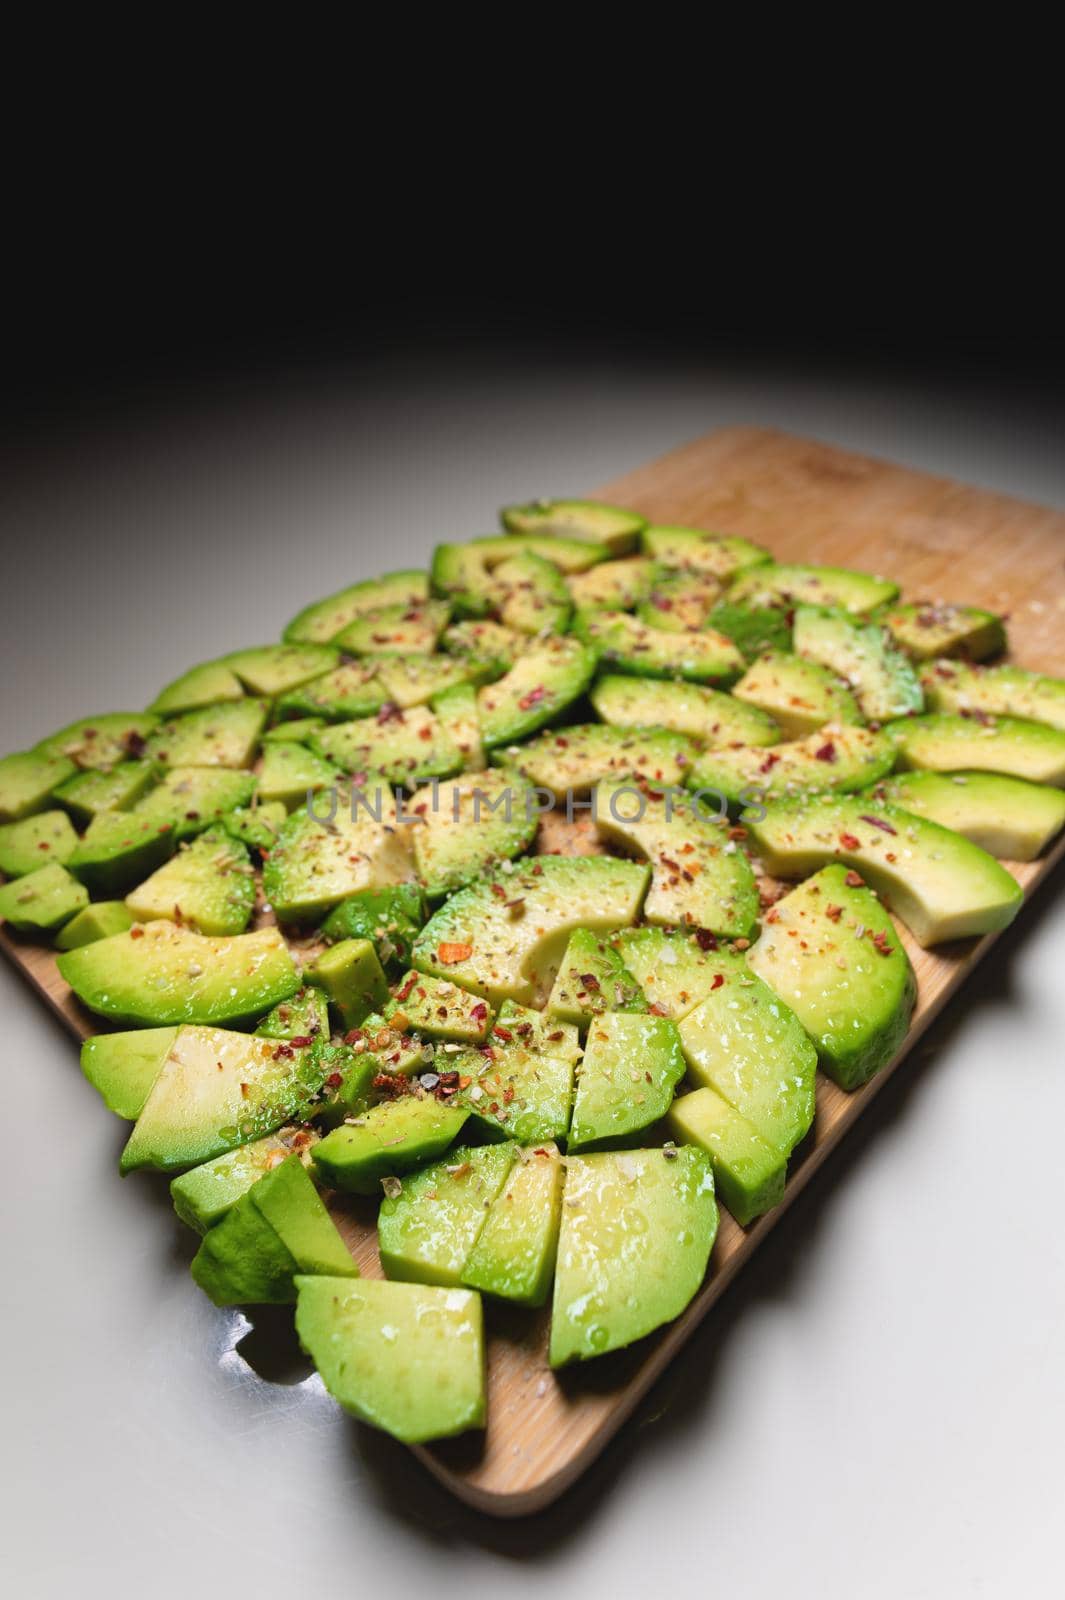 Wide Angle Large slices of sliced ripe avocado lie textured on a wooden cutting board. Sprinkled with spices. Healthy food. Vegetarianism by yanik88